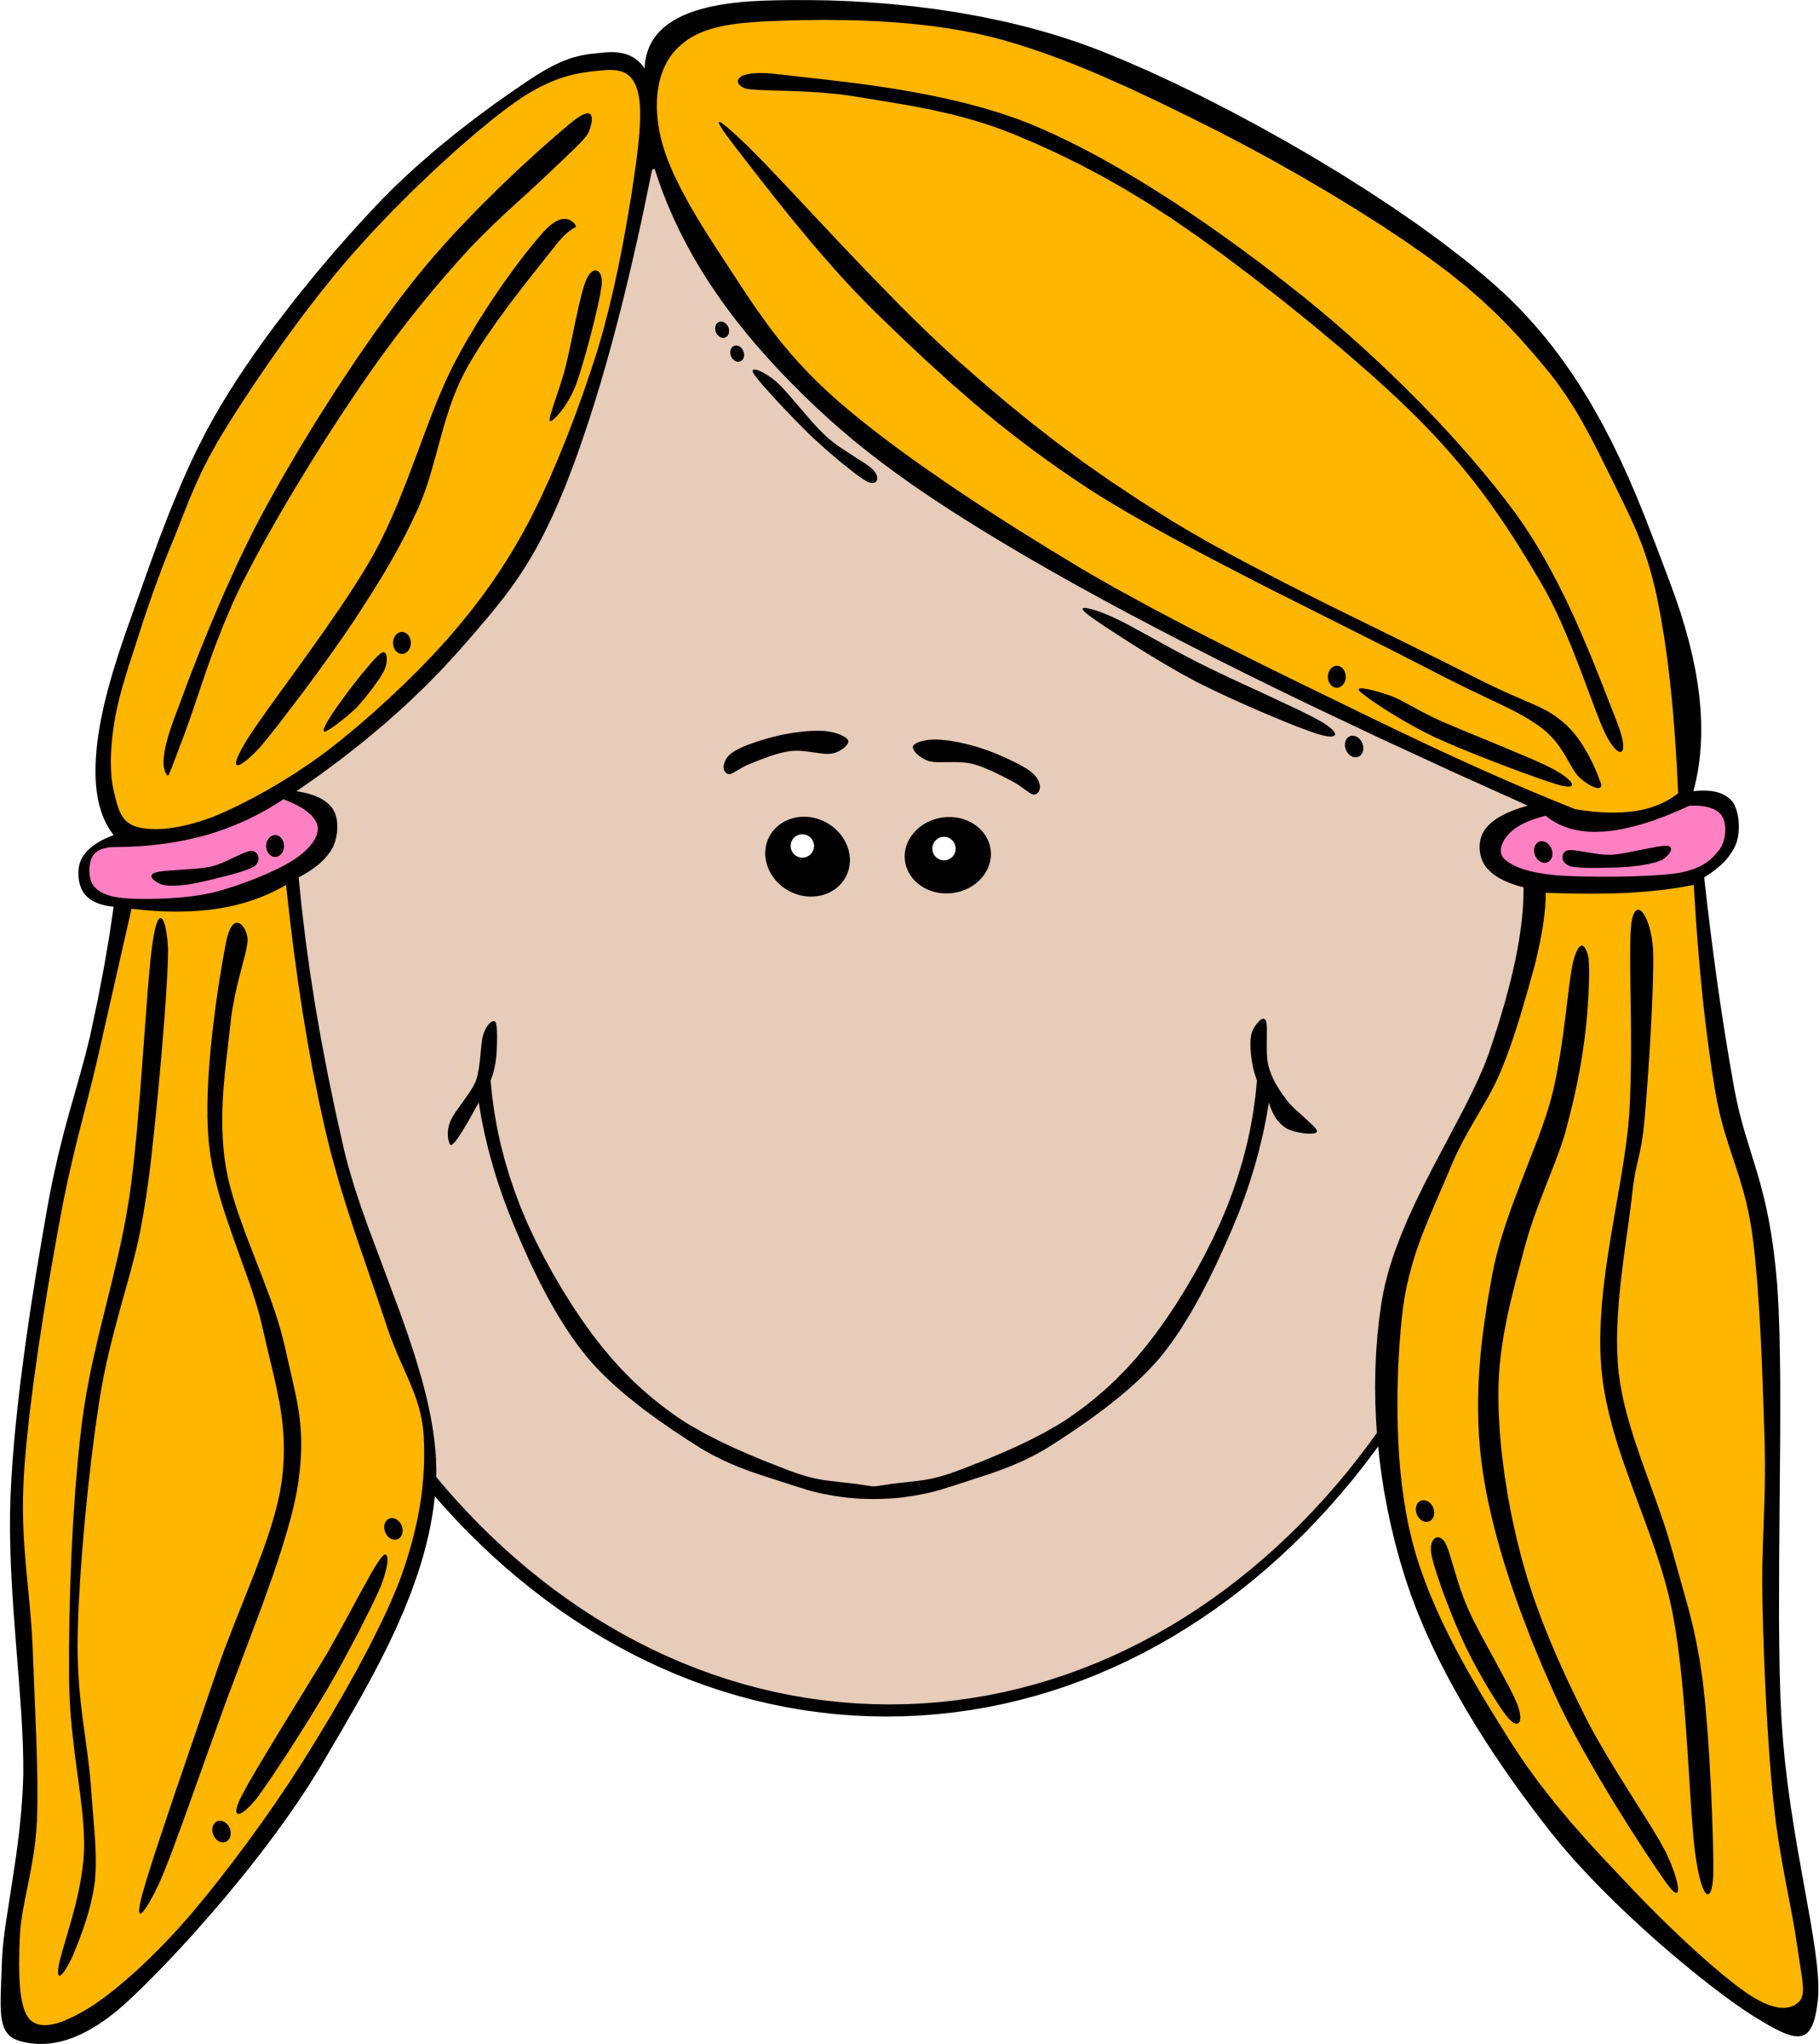 36 clipart faces of people - ClipartFox